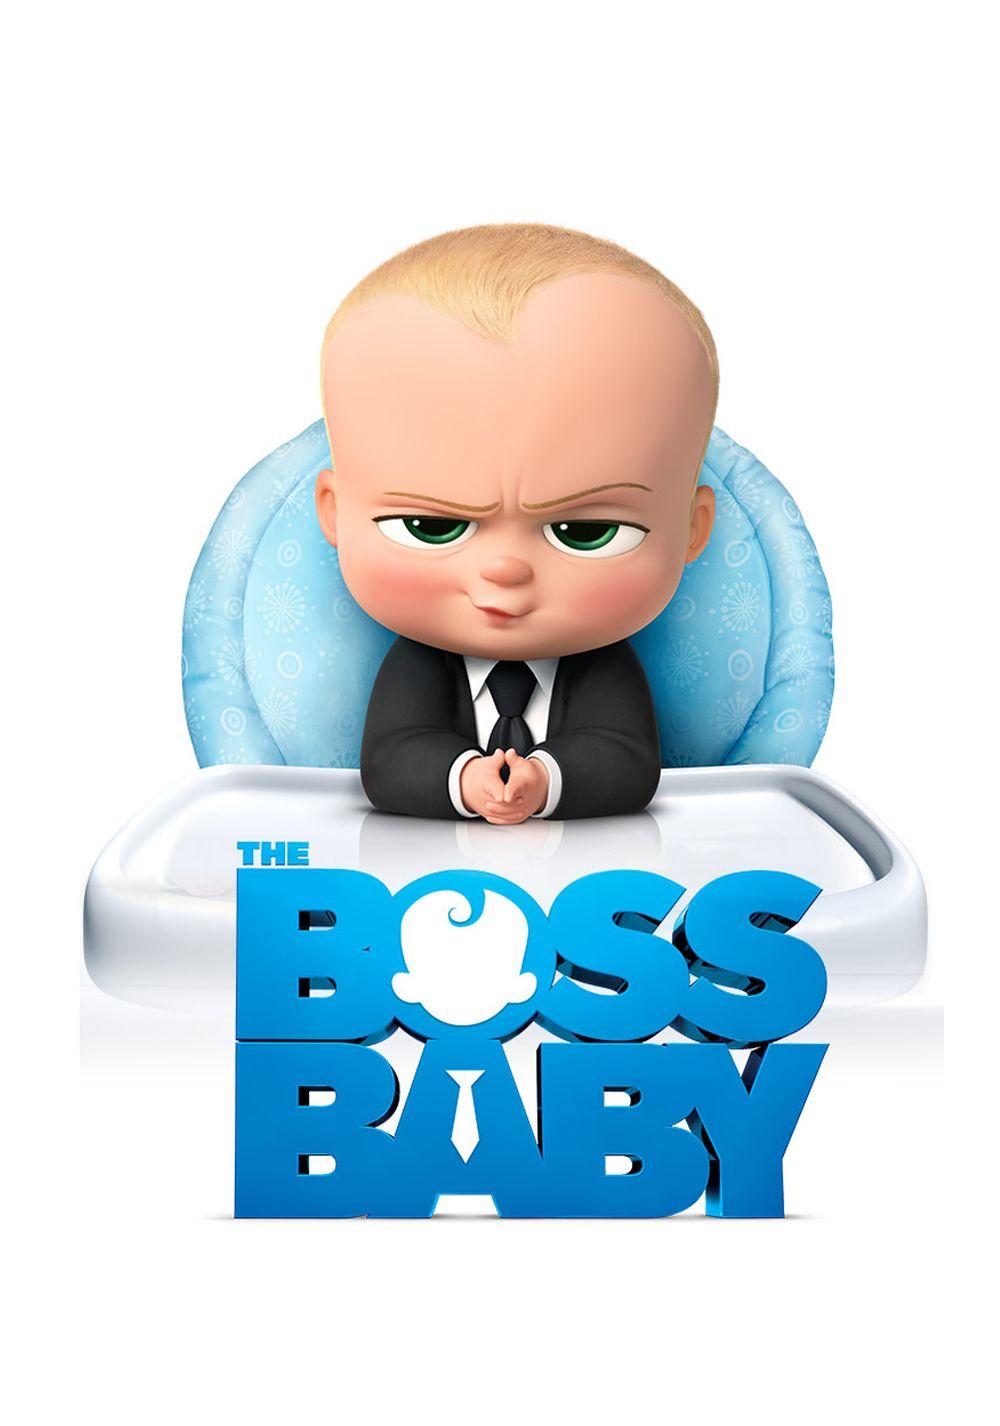 The Boss Baby- Just watched it. A touching yet hilarious movie. A